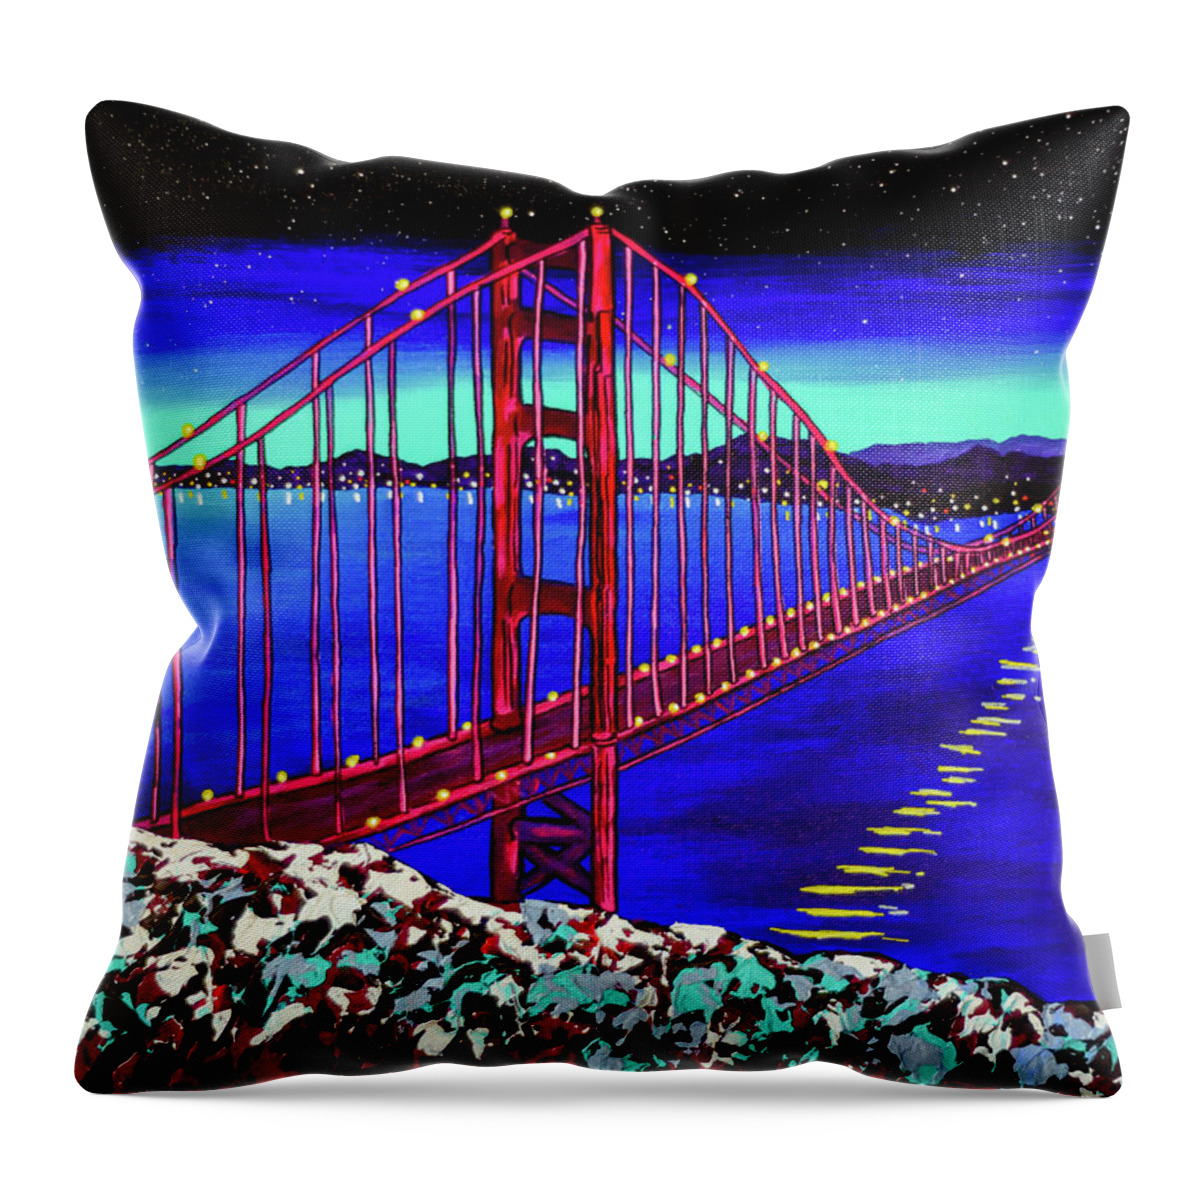 Golden Gate Bridge Throw Pillow featuring the painting Let's Build a Bridge by Ashley Wright